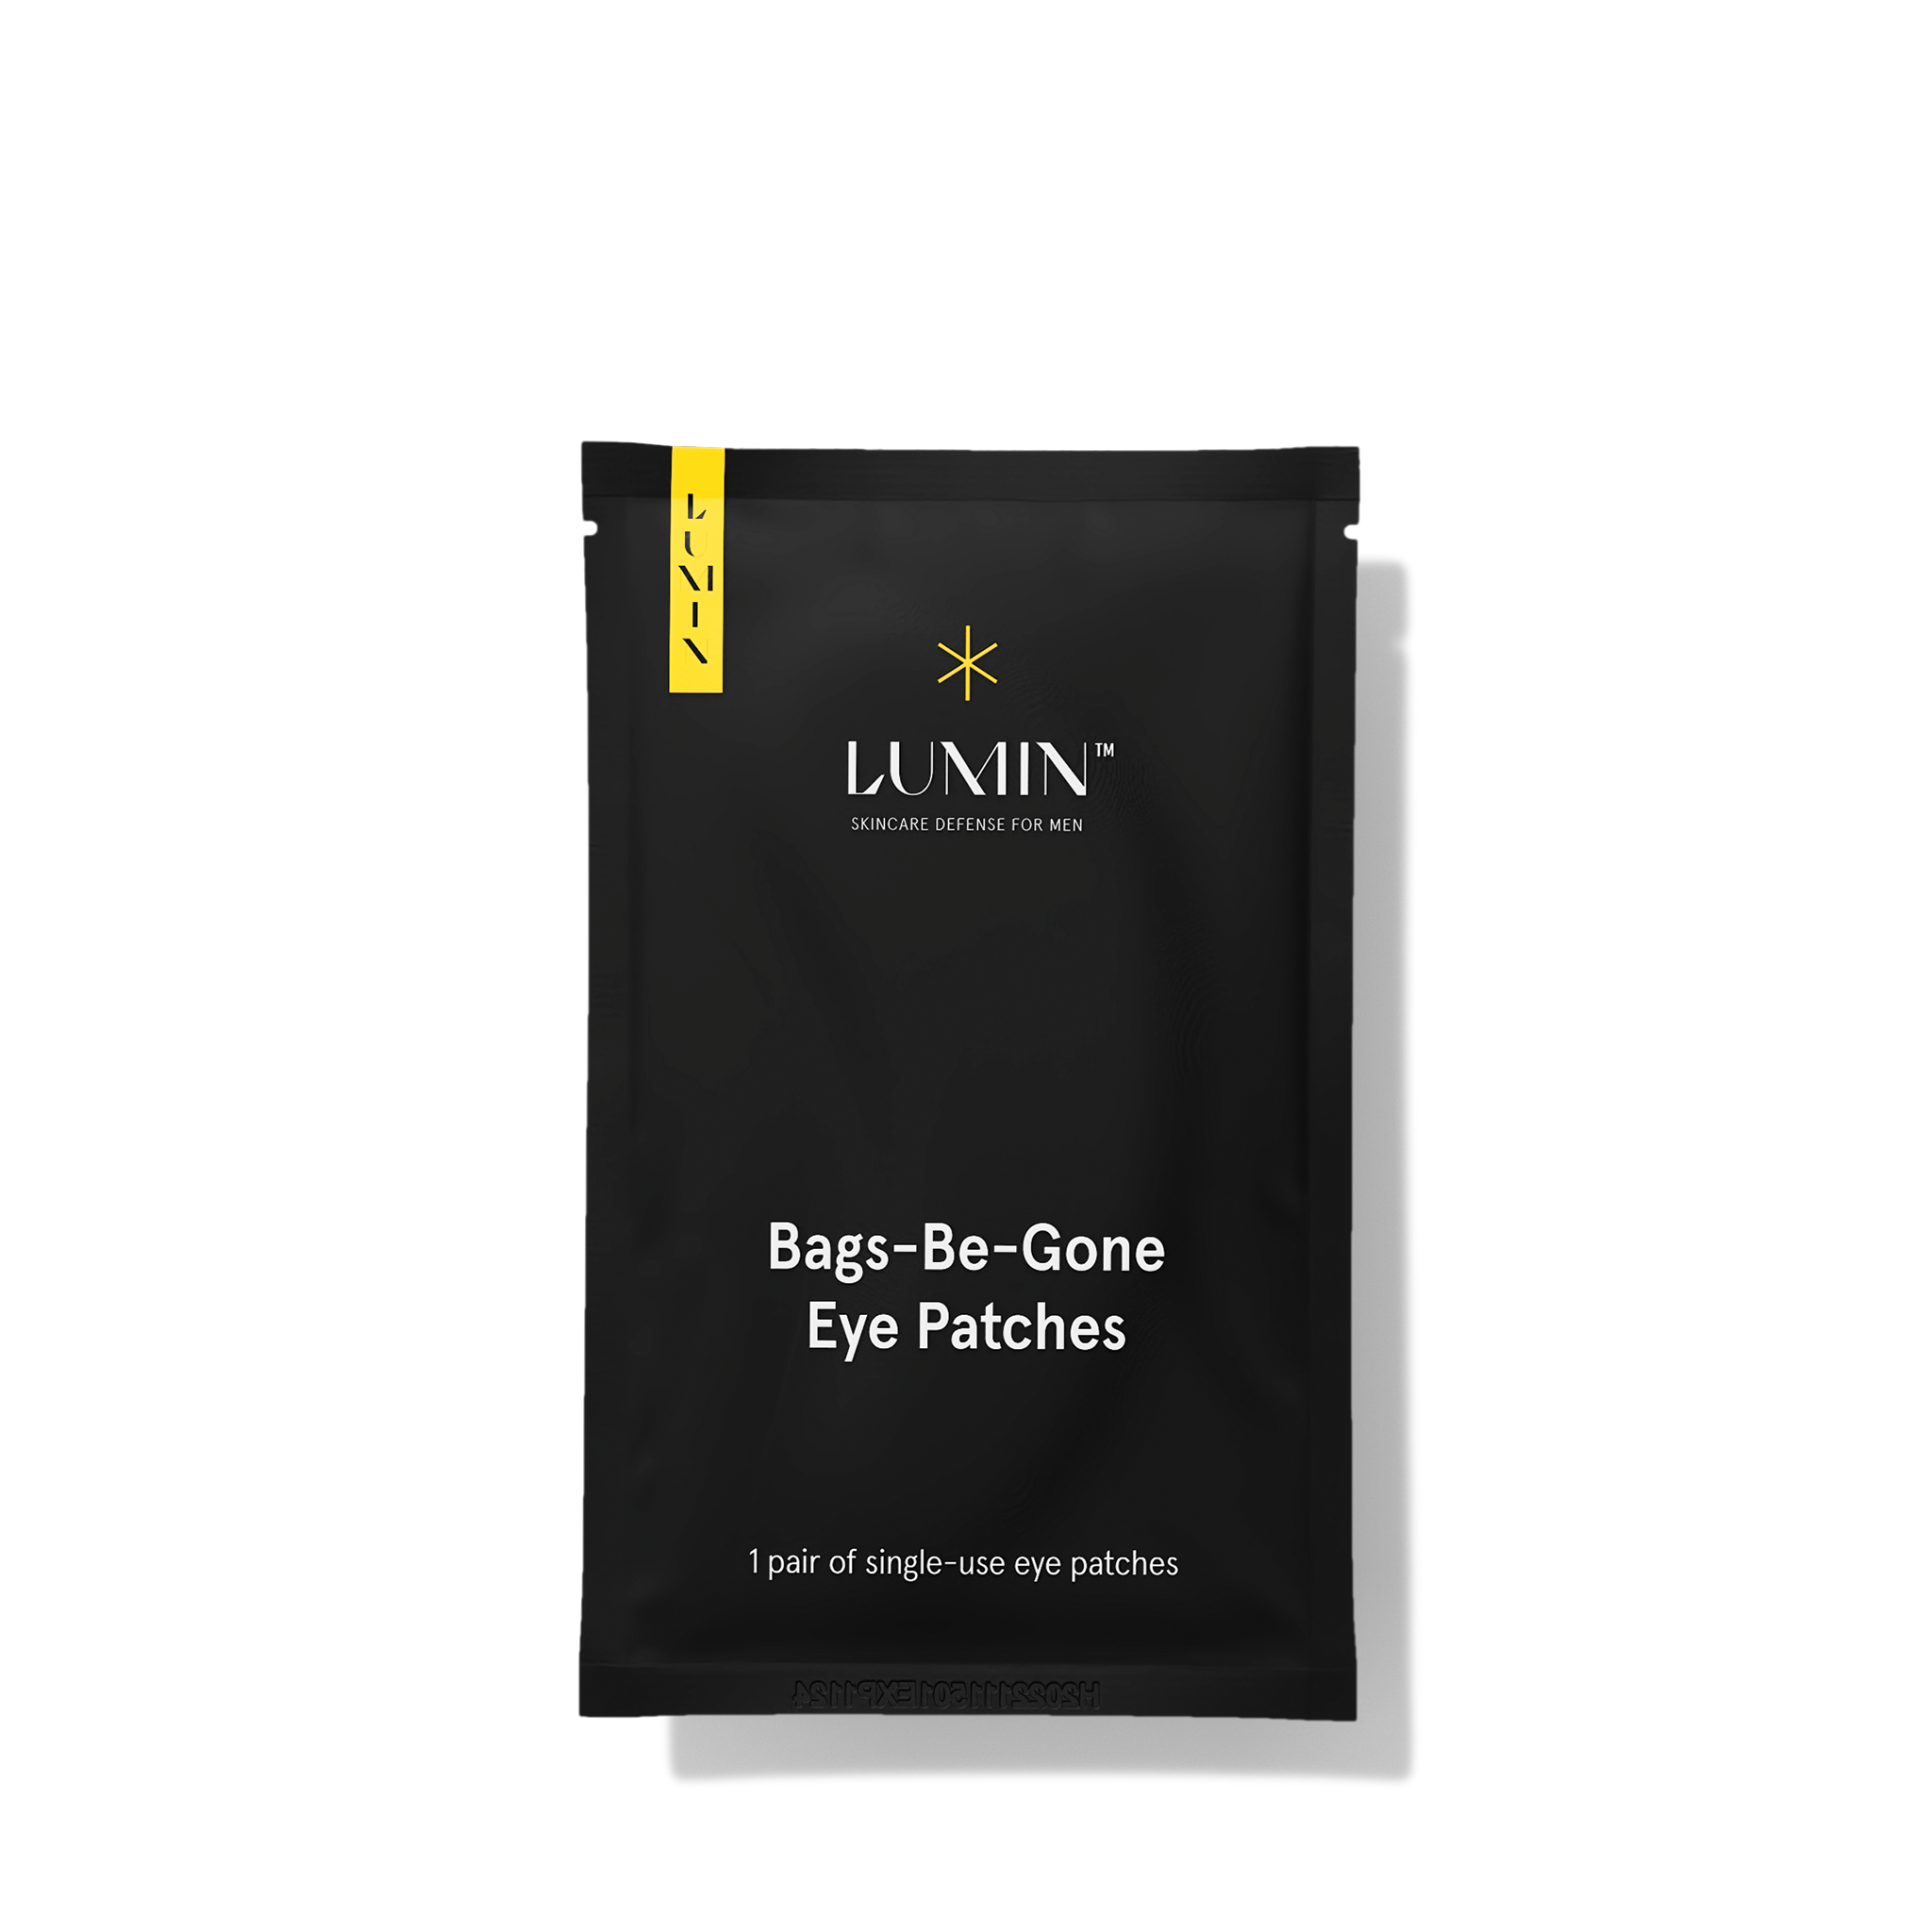 Bags-Be-Gone Eye Patches - Men's Hydrating Under Eye Patches | Lumin